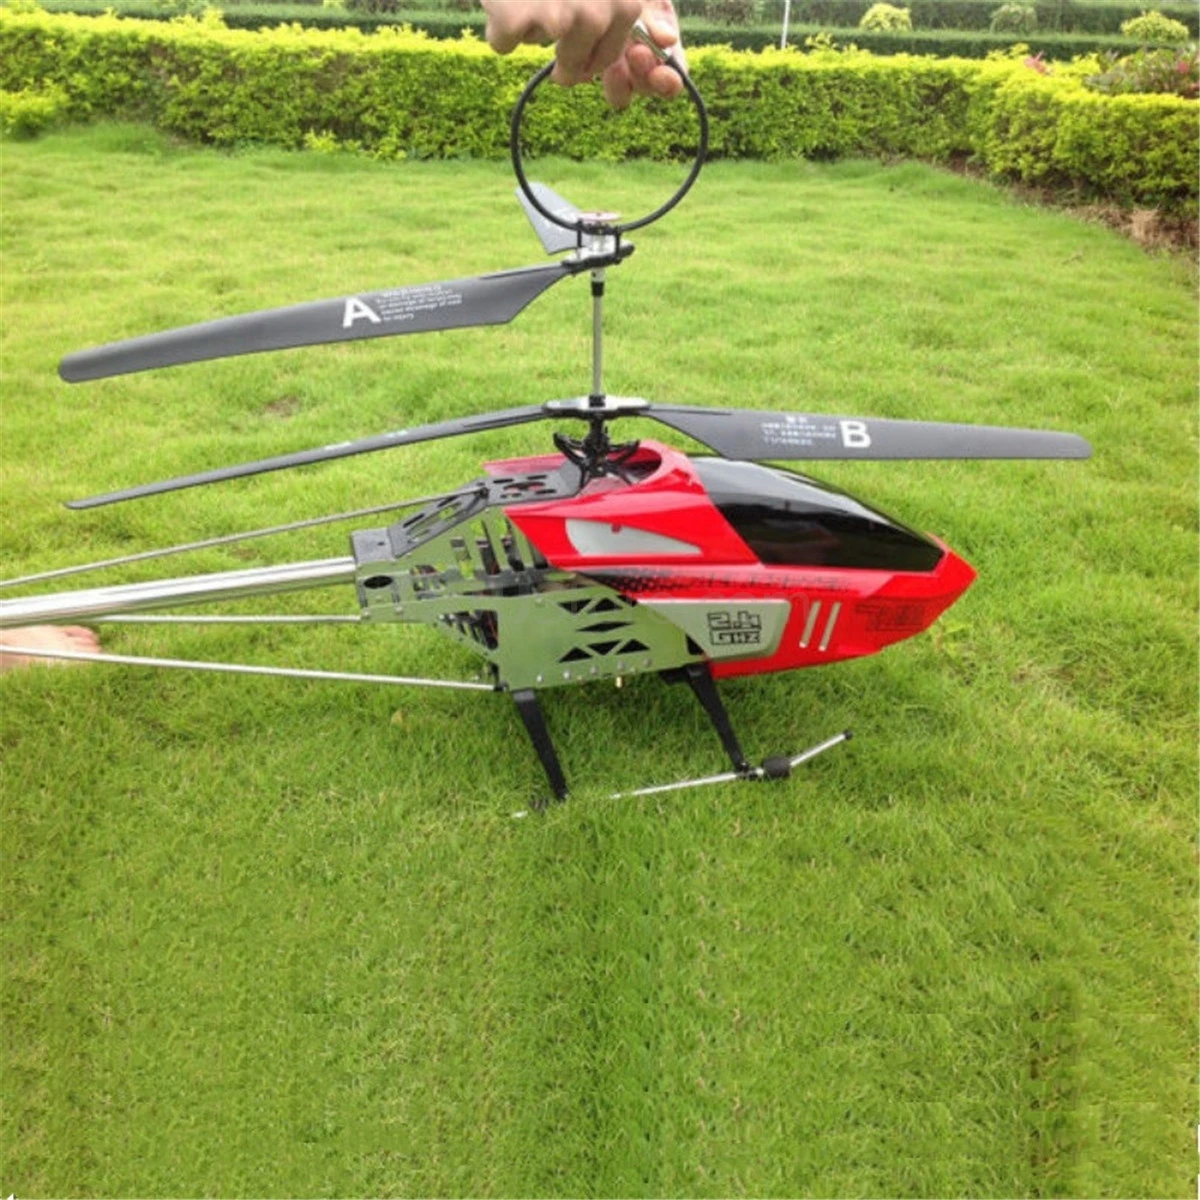 75CM big large rc helicopter BR6508 2.4G 3.5CH Super Large Metal RC Helicopter kids child best gifts toy play 2